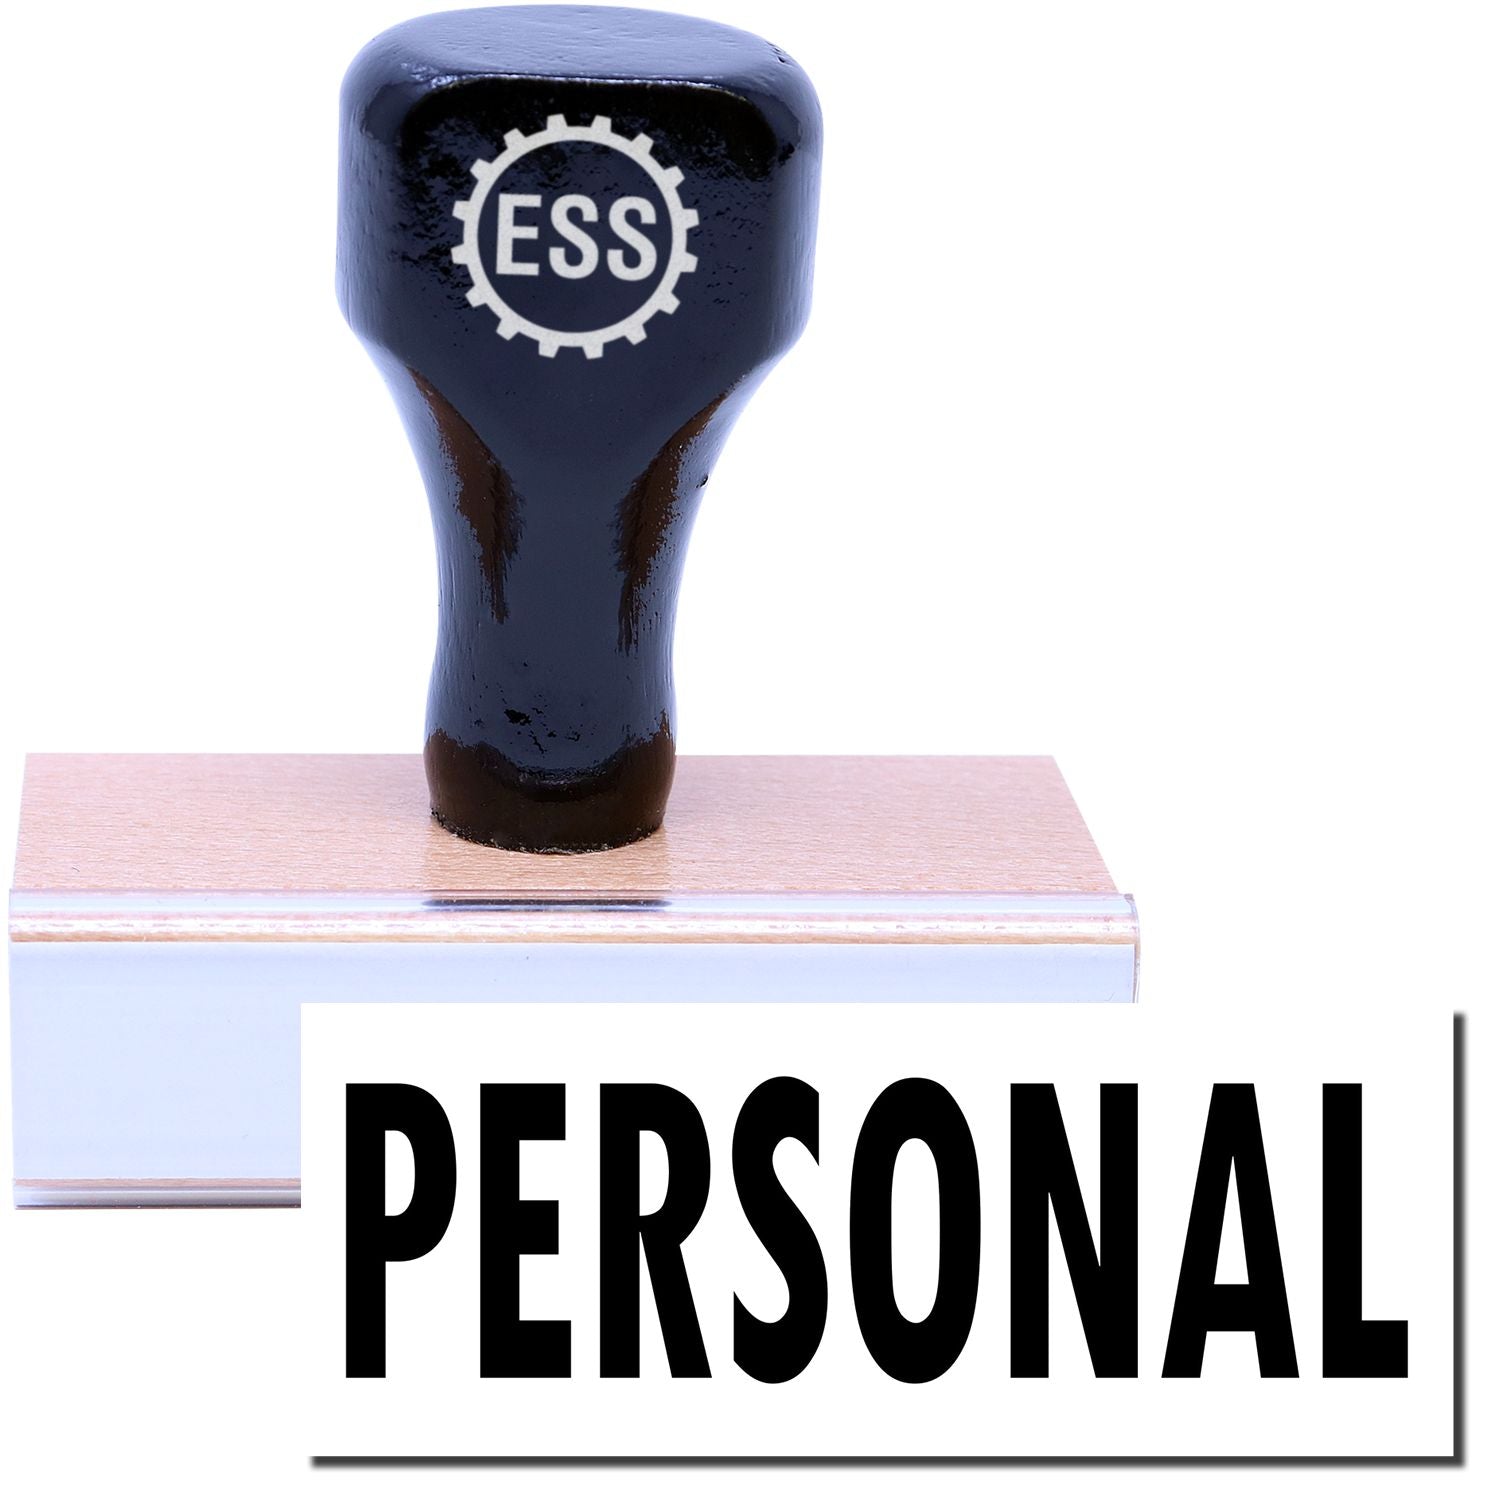 A stock office rubber stamp with a stamped image showing how the text "PERSONAL" is displayed after stamping.